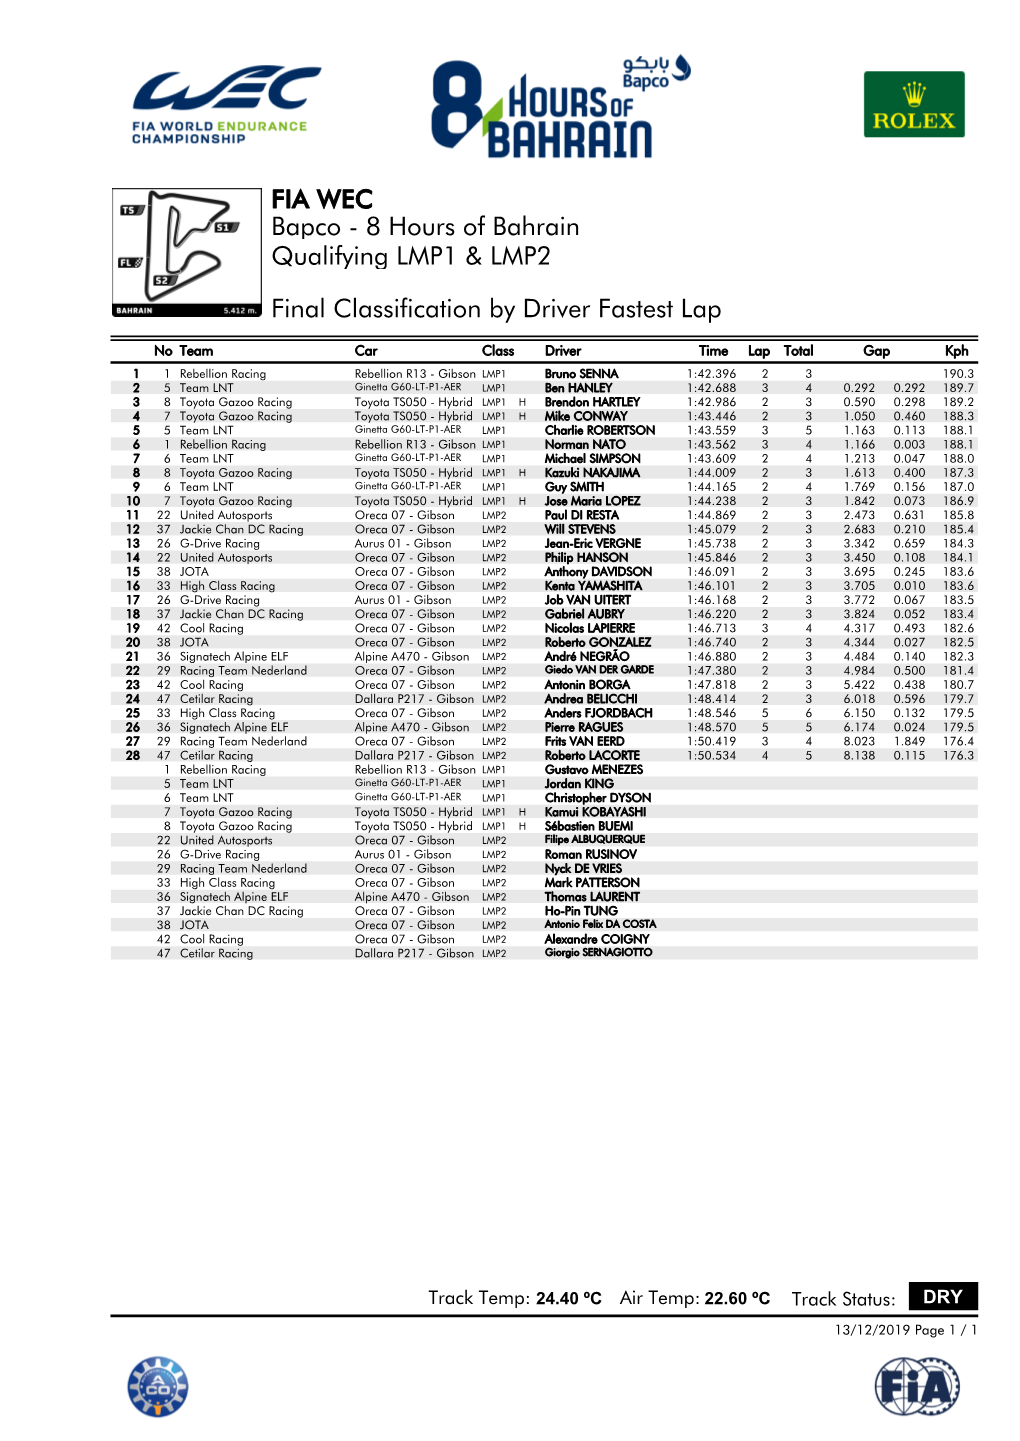 Final Classification by Driver Fastest Lap Qualifying LMP1 & LMP2